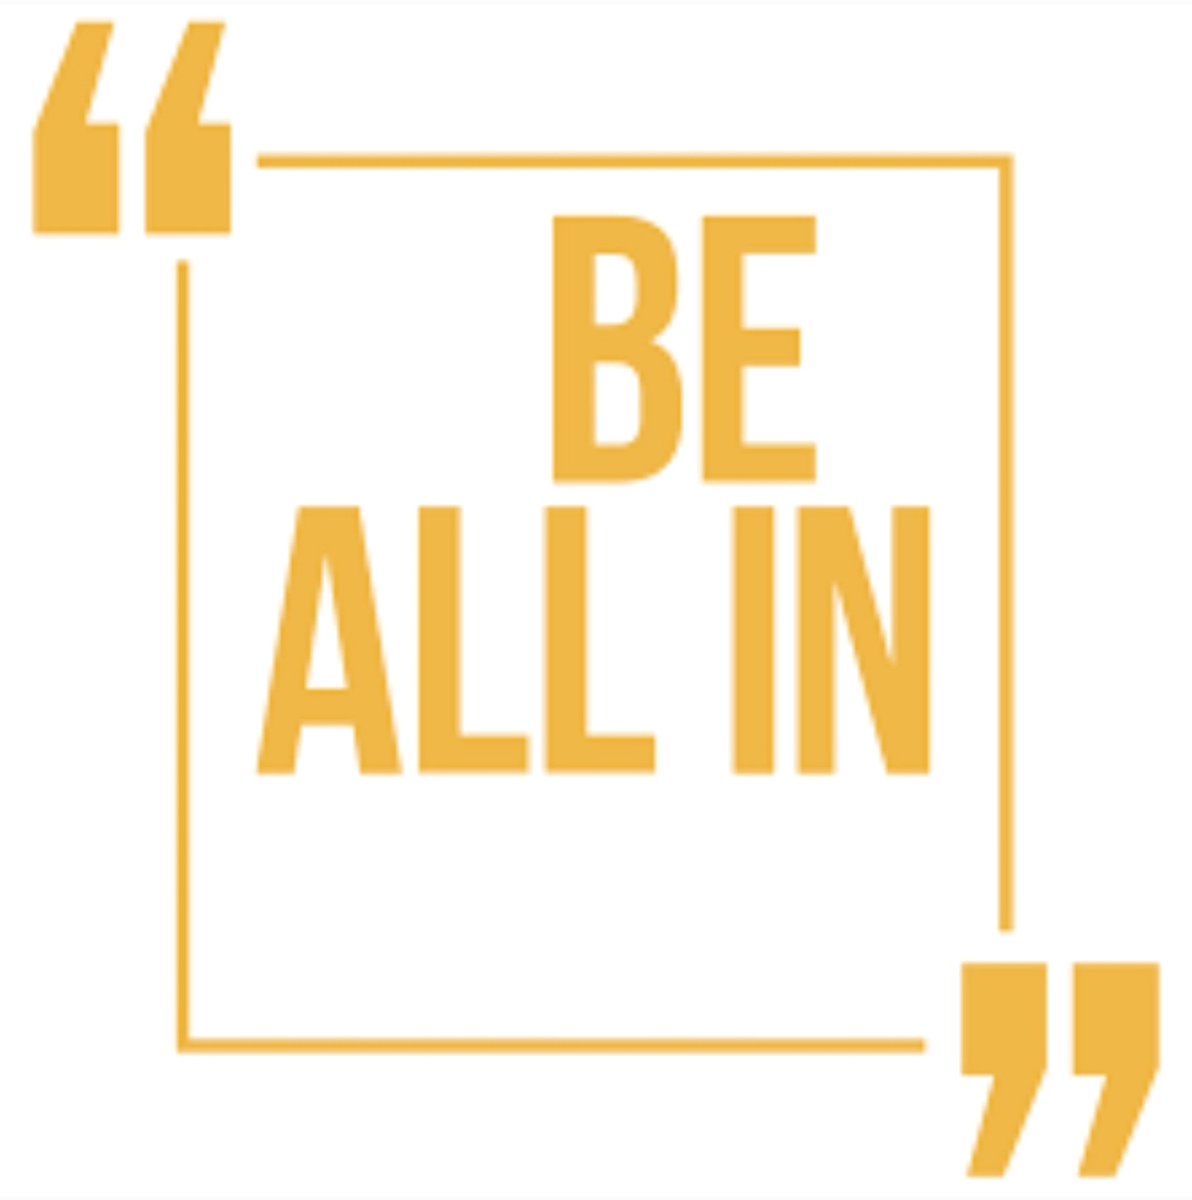 Good morning! Pace yourself - pick up the pace - give it your all and be all in for the benefit of yourself and others. #beallin #pickupthepace #giveityourall #helpinthehouse #solutionist #iamaningredient #JusticeGeneral